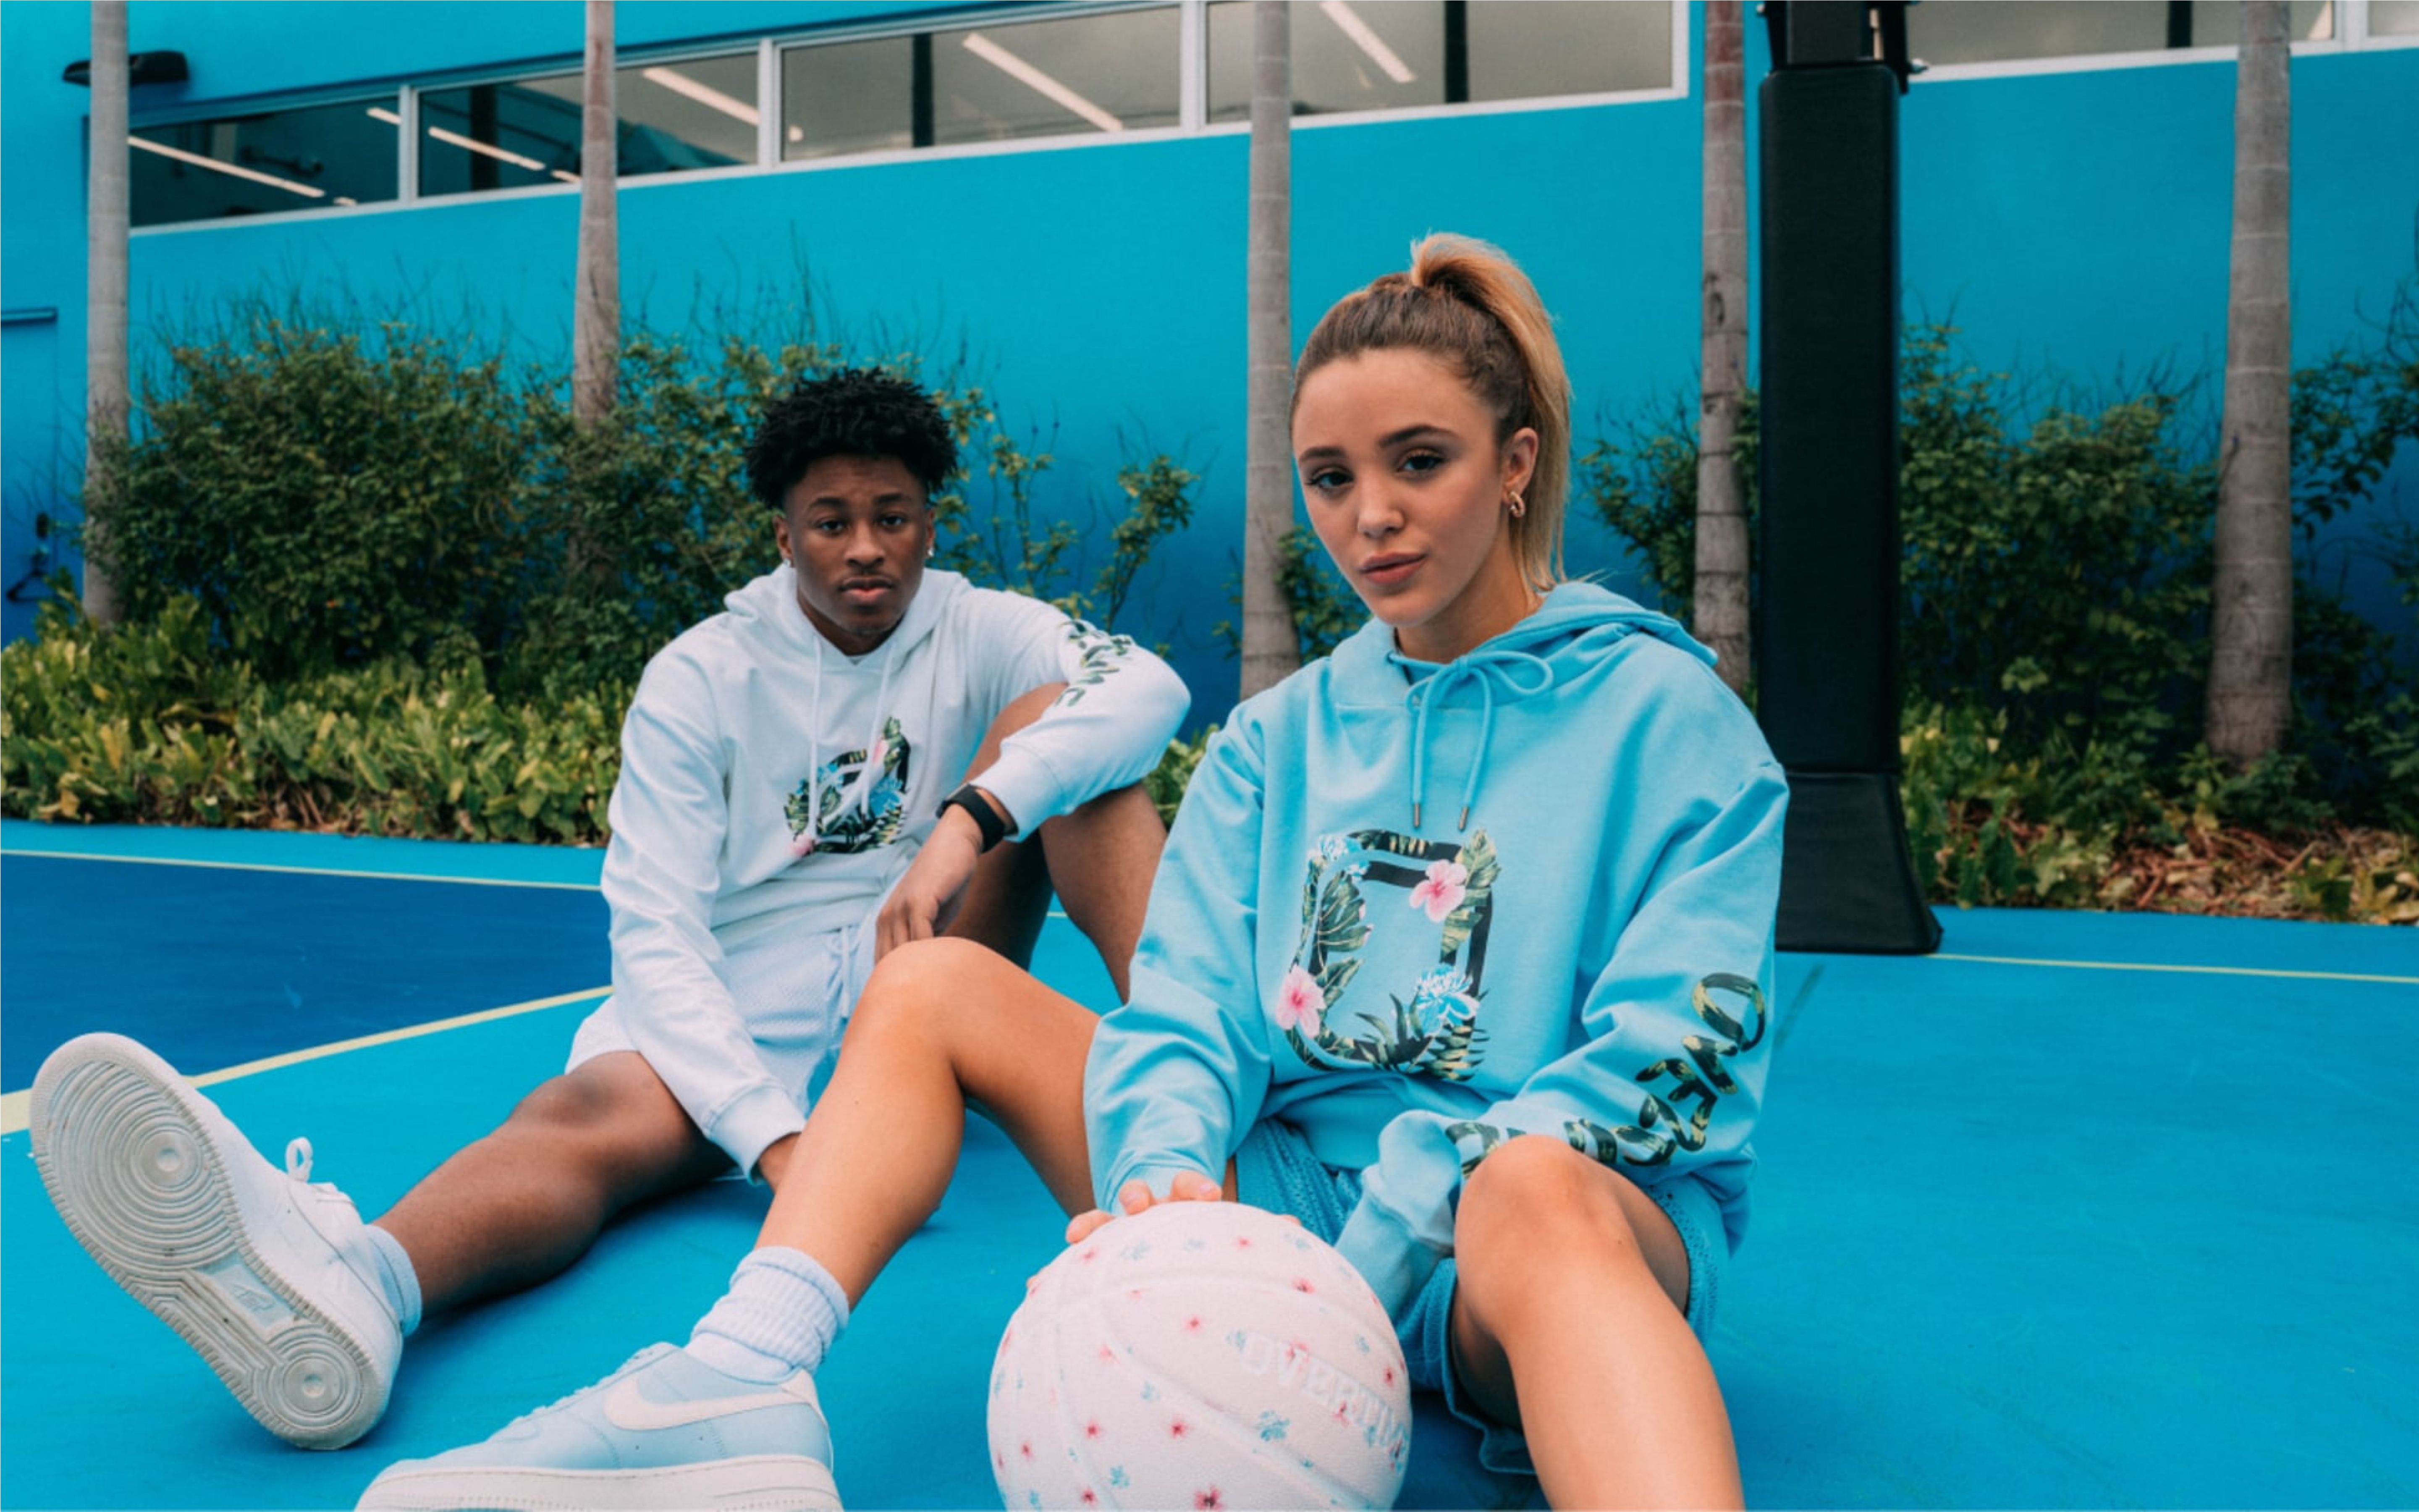 Two teens sit on a basketball court wearing Overtime hoodies